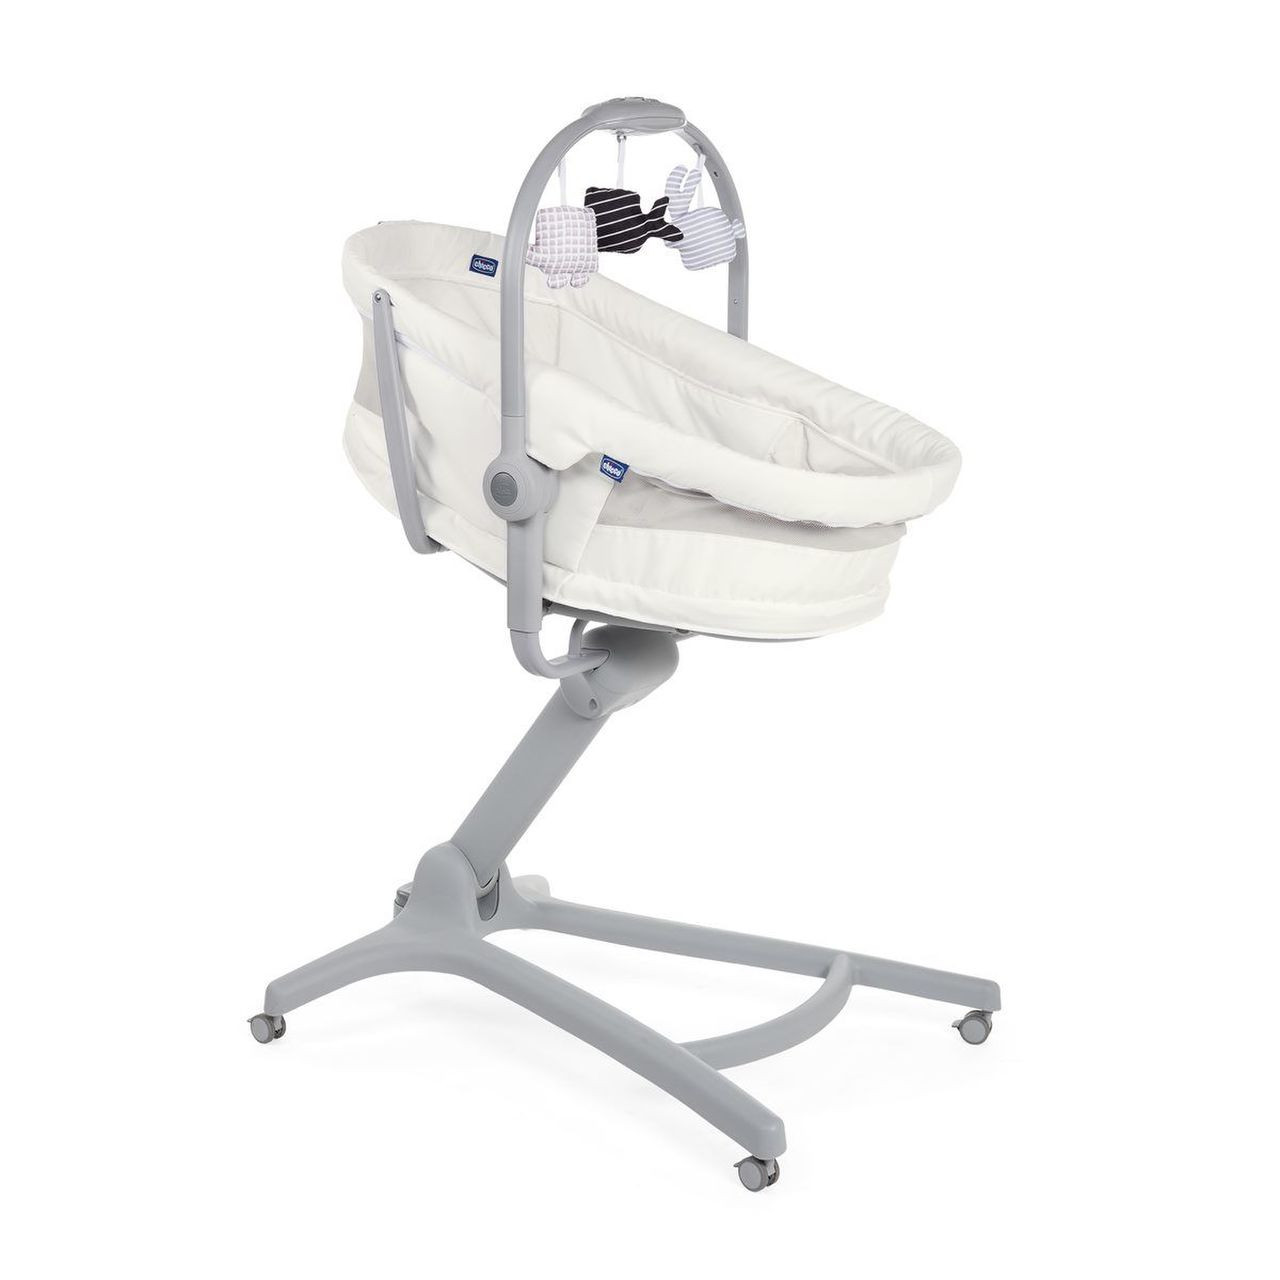 CHICCO 4 IN 1 Hug Air Bundle 💖💙 Baby Hug 4 in 1 can be used as a cradle,  a raised recliner, a highchair and a table chair, to accompany you and